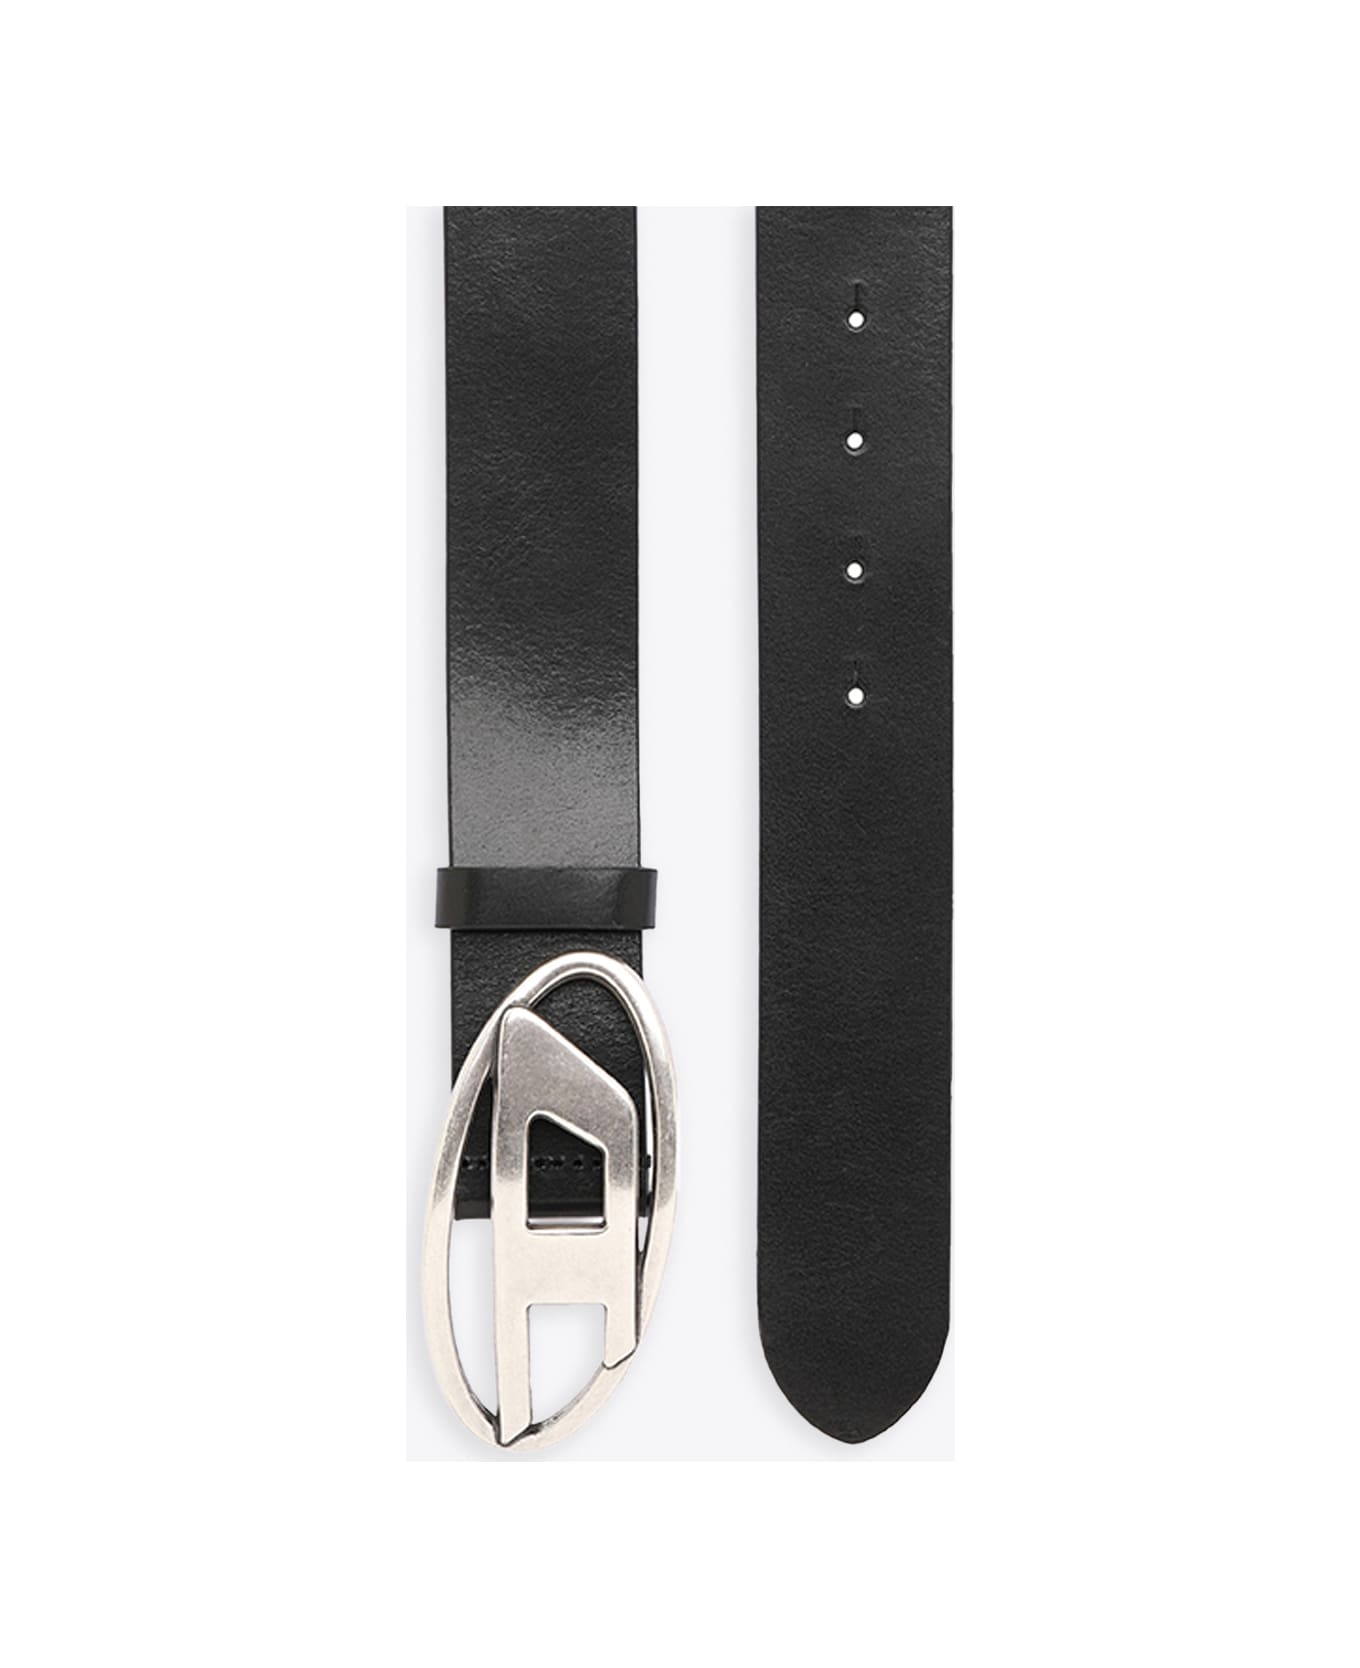 Diesel B-1dr Black leather belt with Oval D buckle - B 1DR - Nero name:456